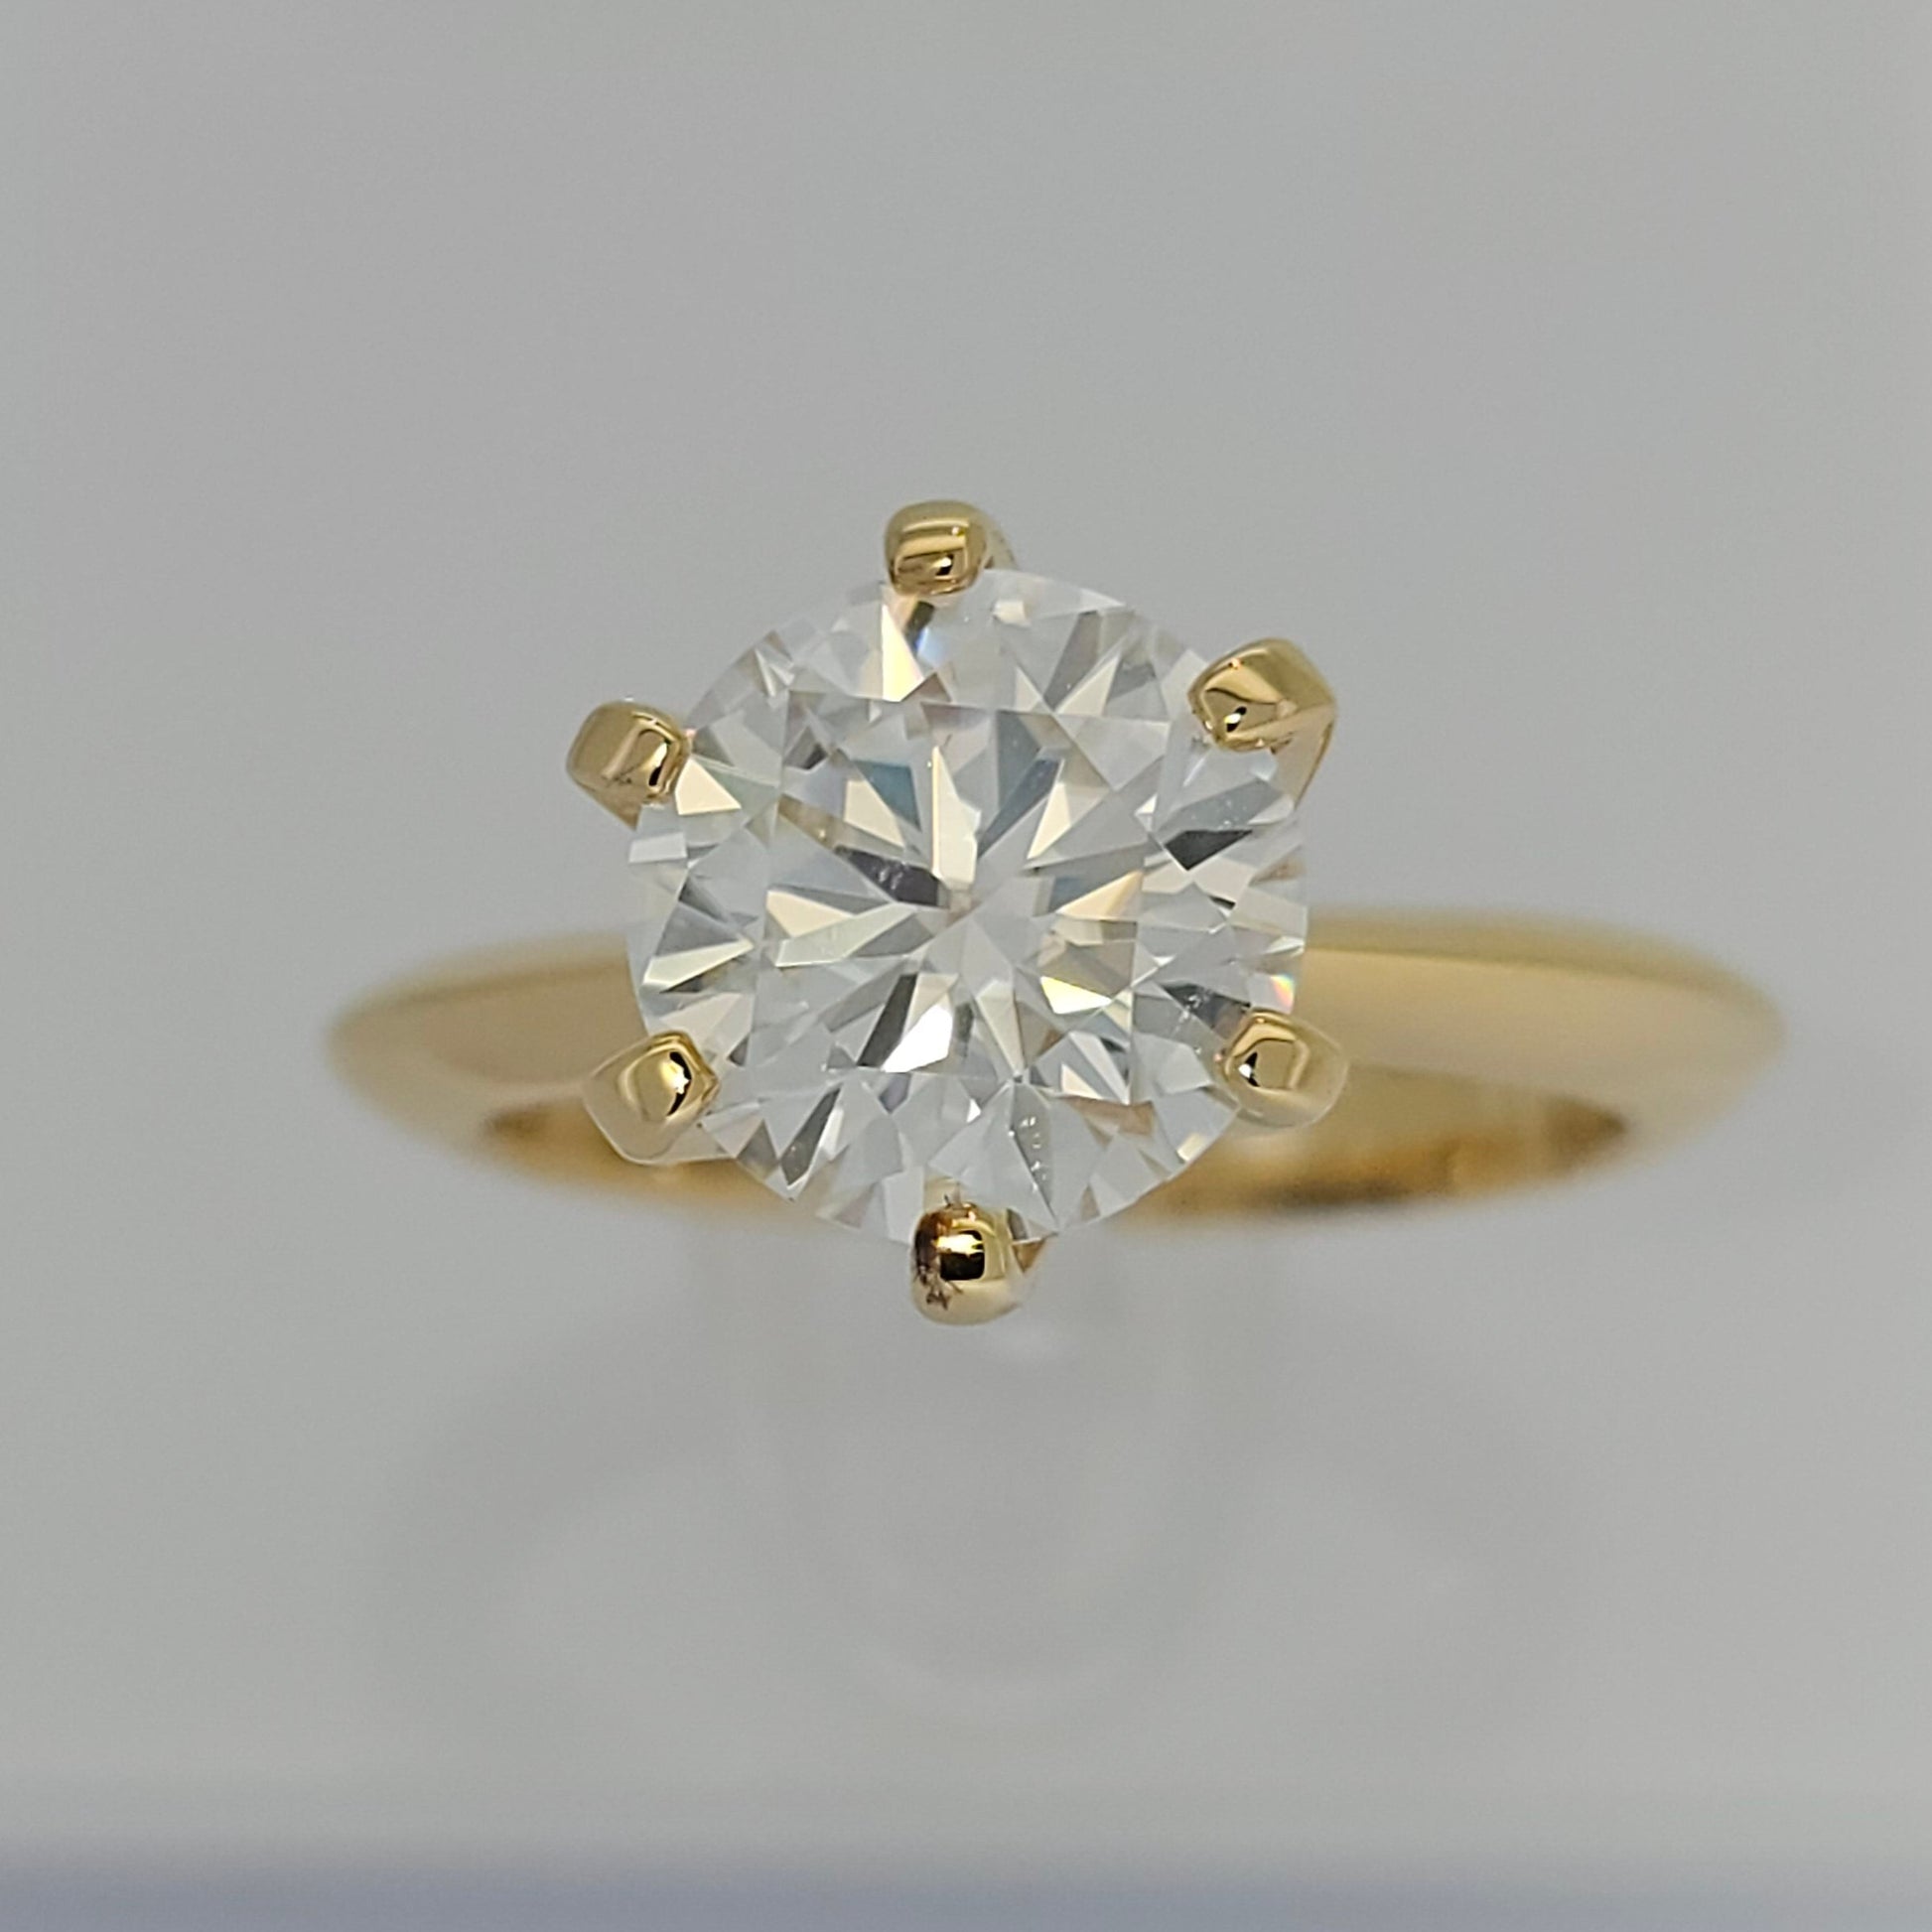 Beautiful Timeless Classic Diamond Solitaire Ring by Boujee Ice